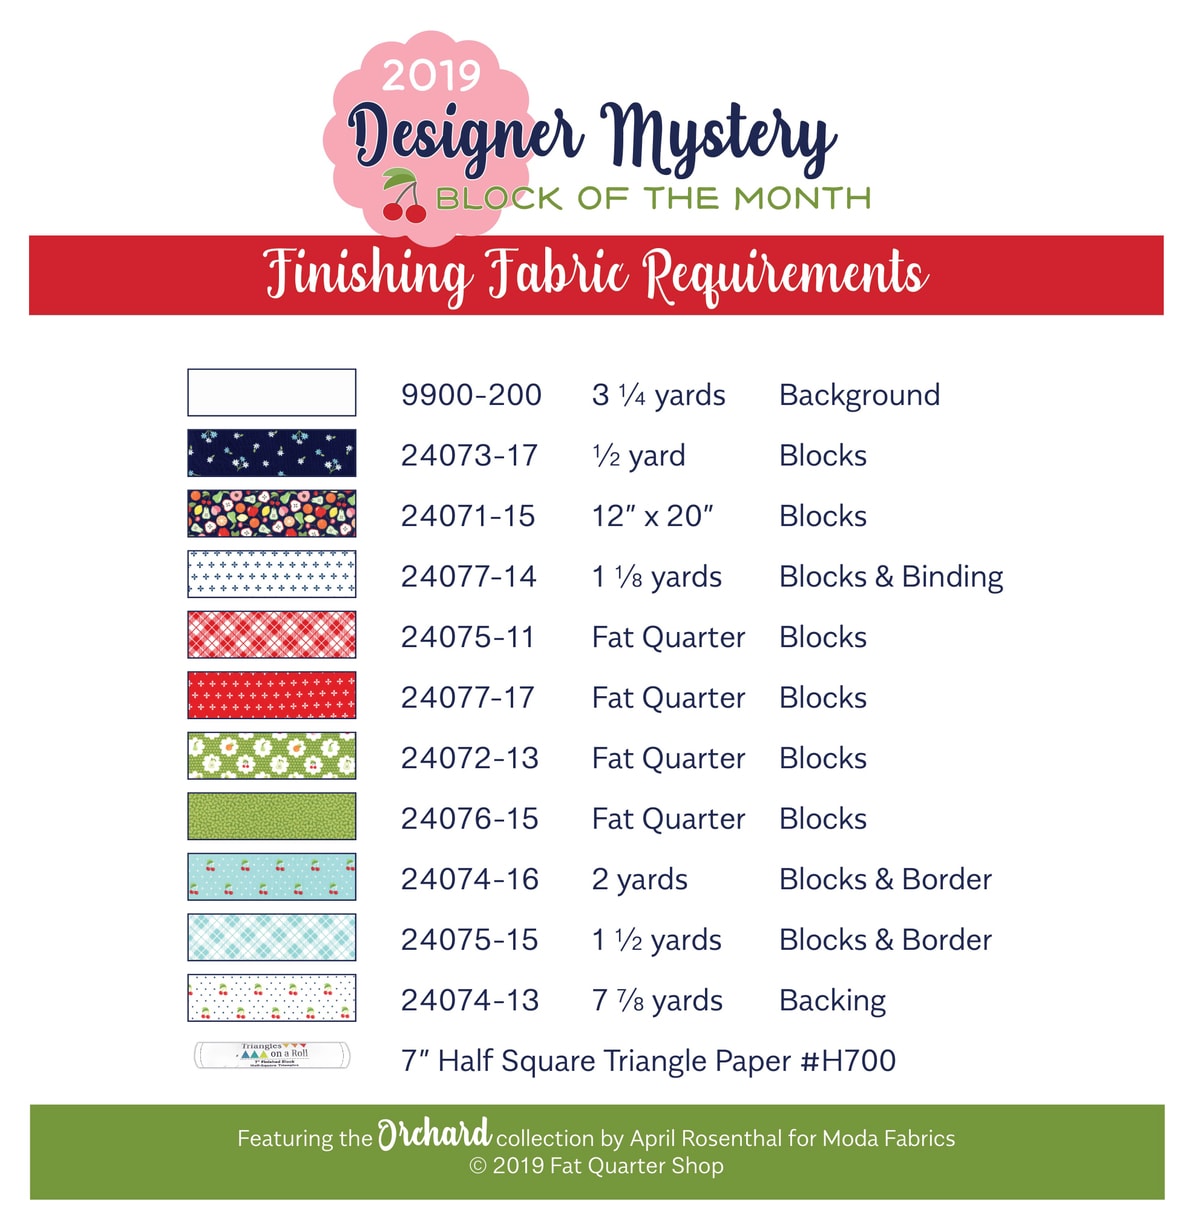 2019 Designer Mystery Finishing Requirements